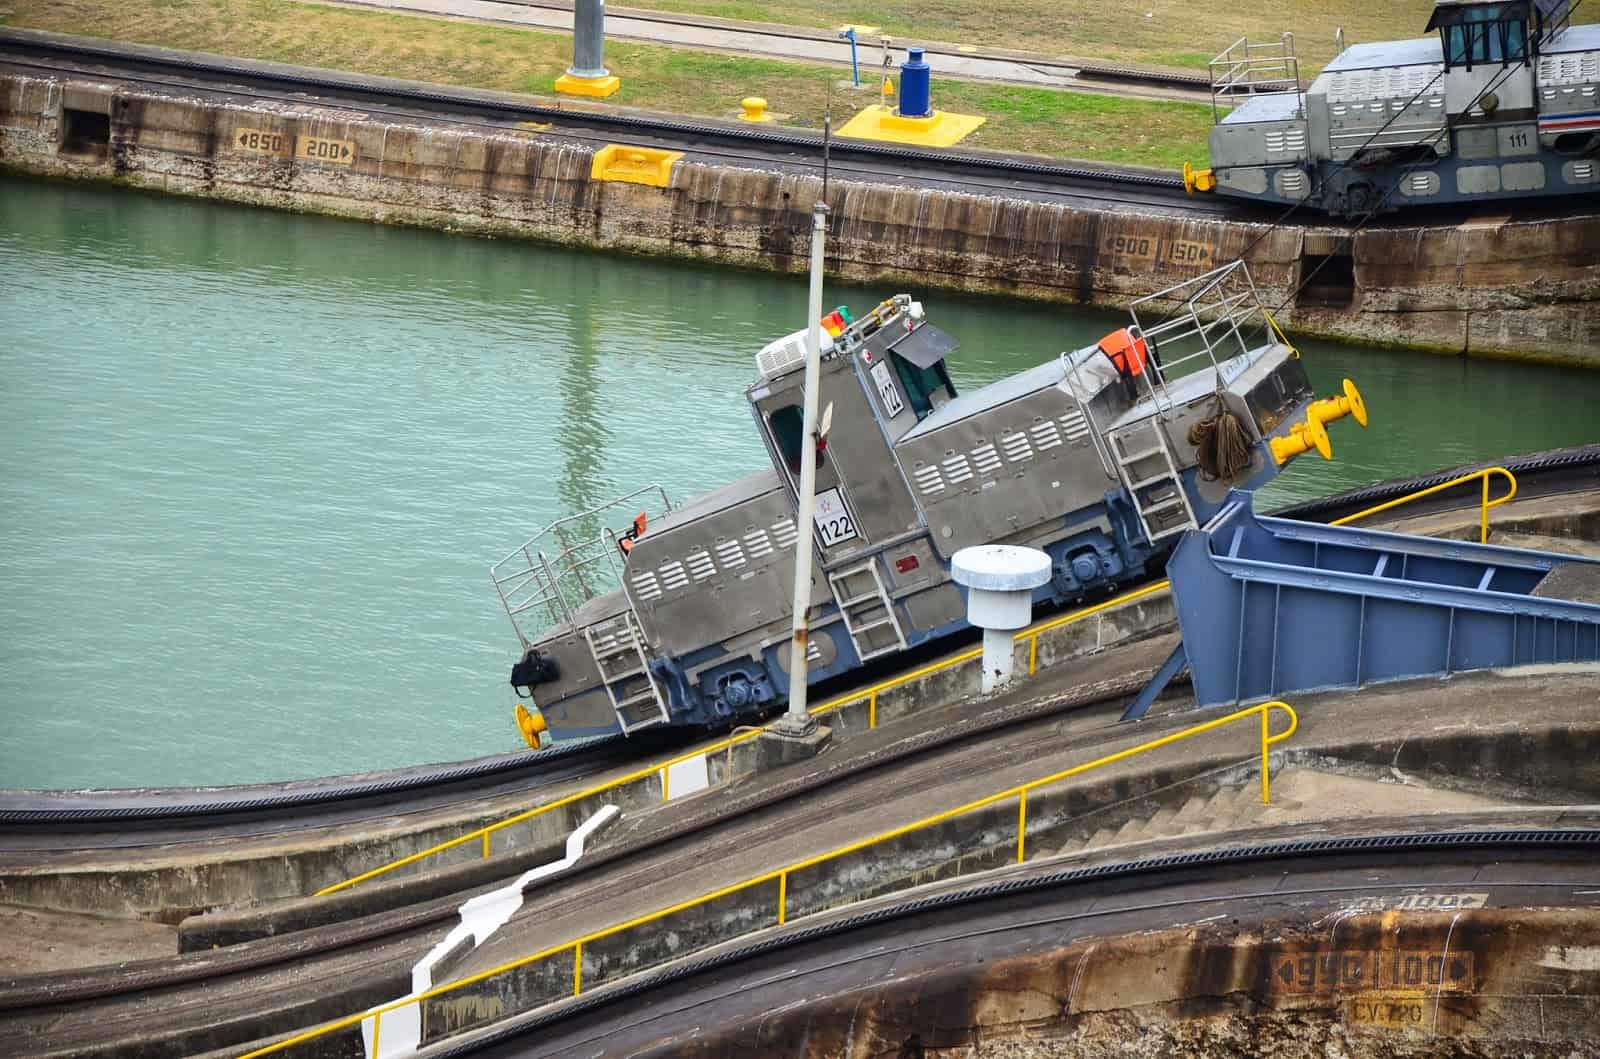 Mule at the Miraflores Locks on the Panama Canal